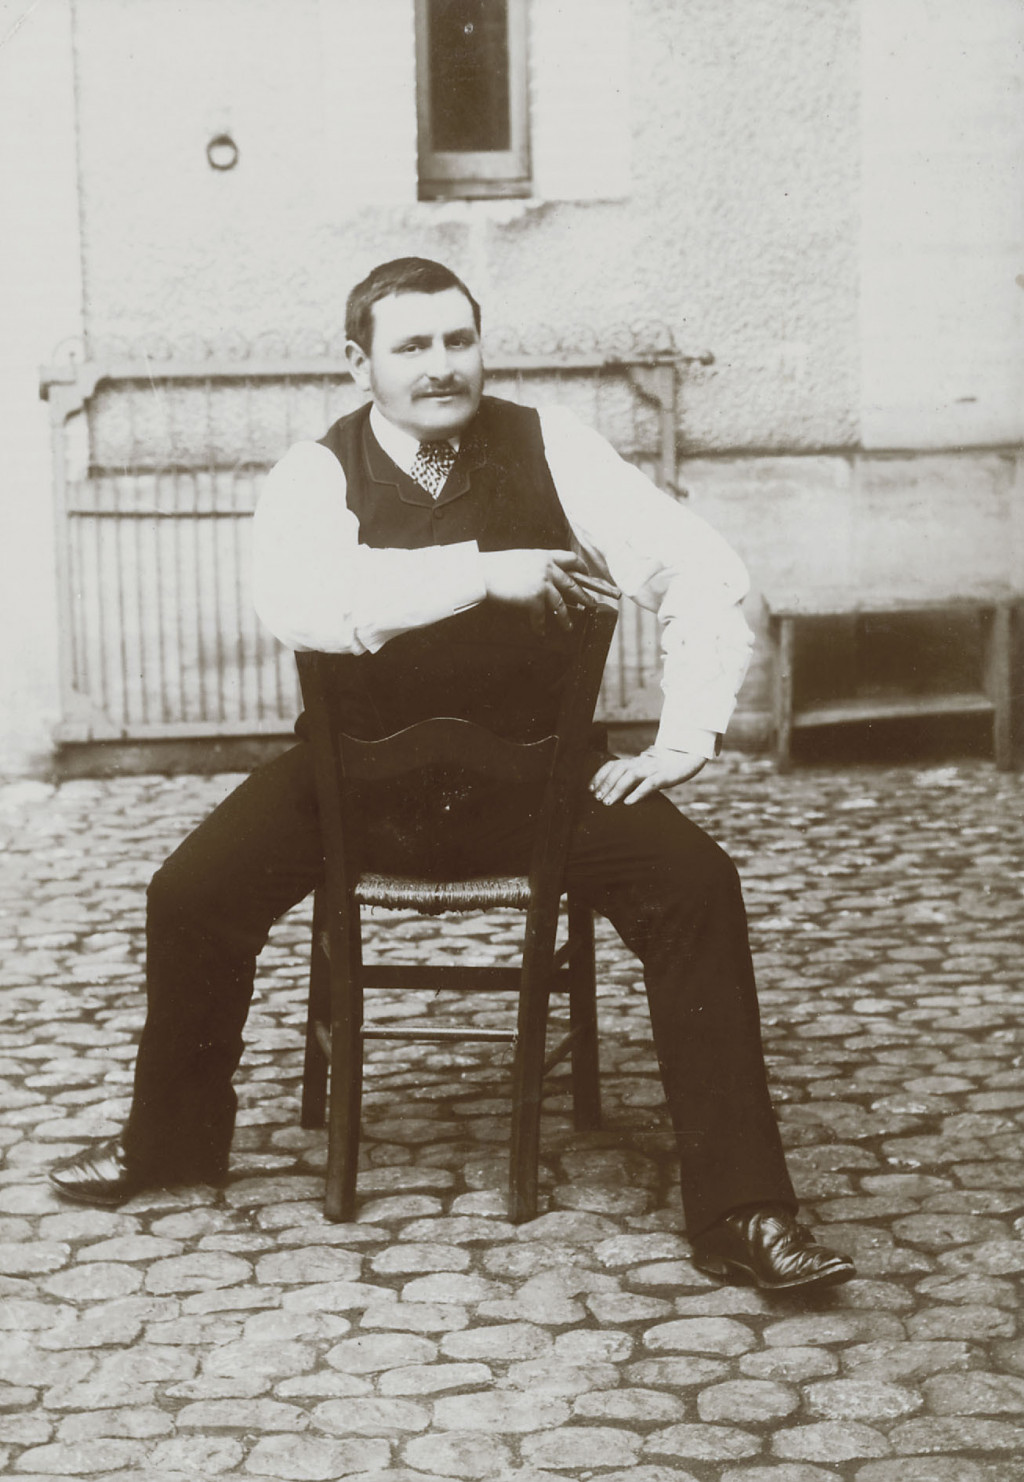 Photograph of Georges Labit sitting on a chair, in the street